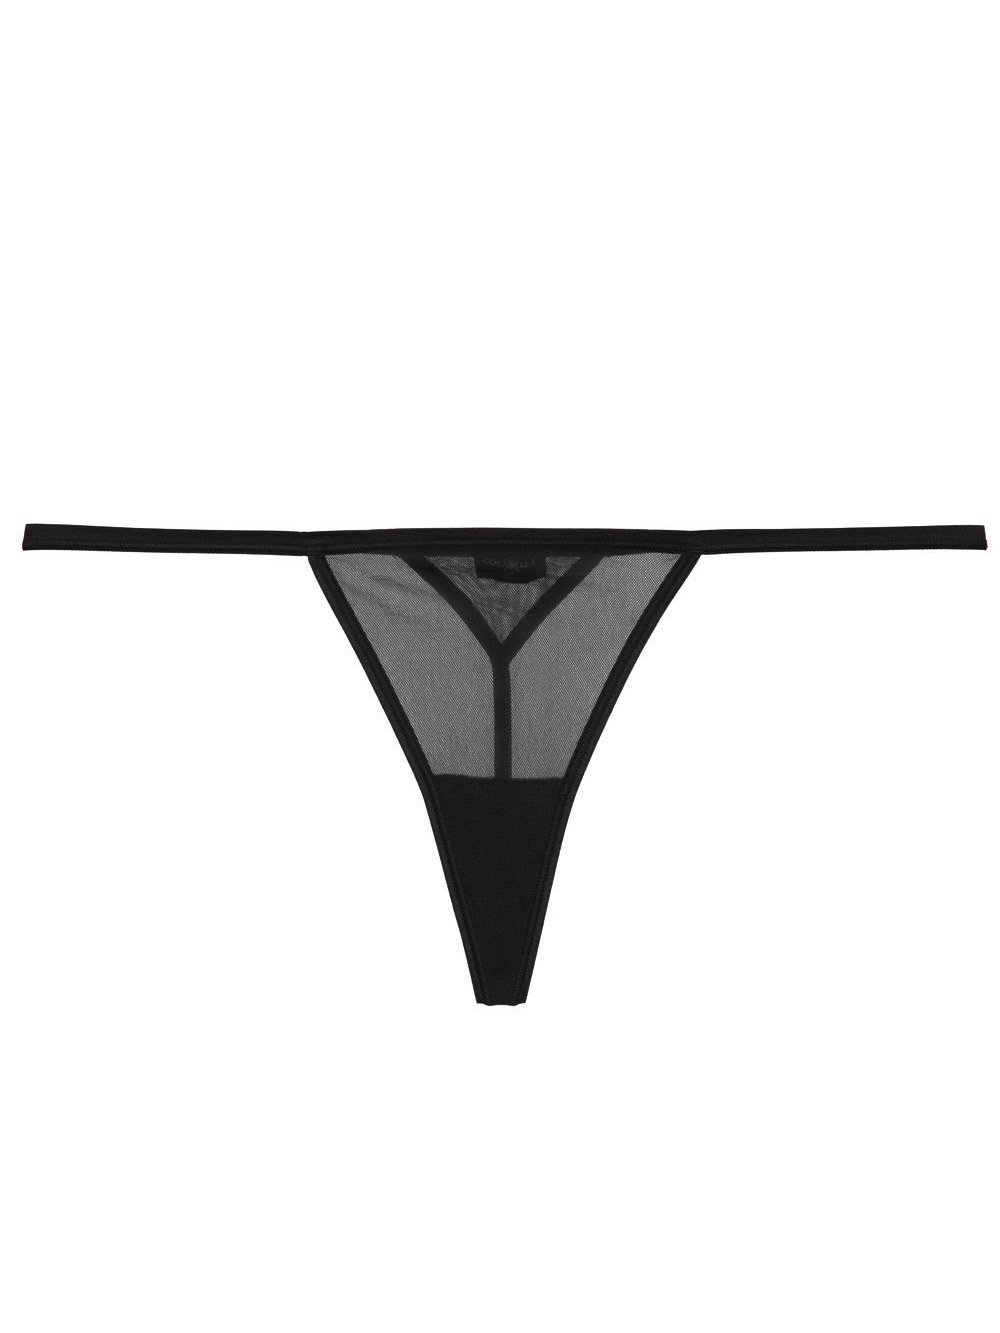 Cosabella G-STRINGS O/S (ONE SIZE) / BLACK Cosabella Soire Confidence Sexy G-String Panties